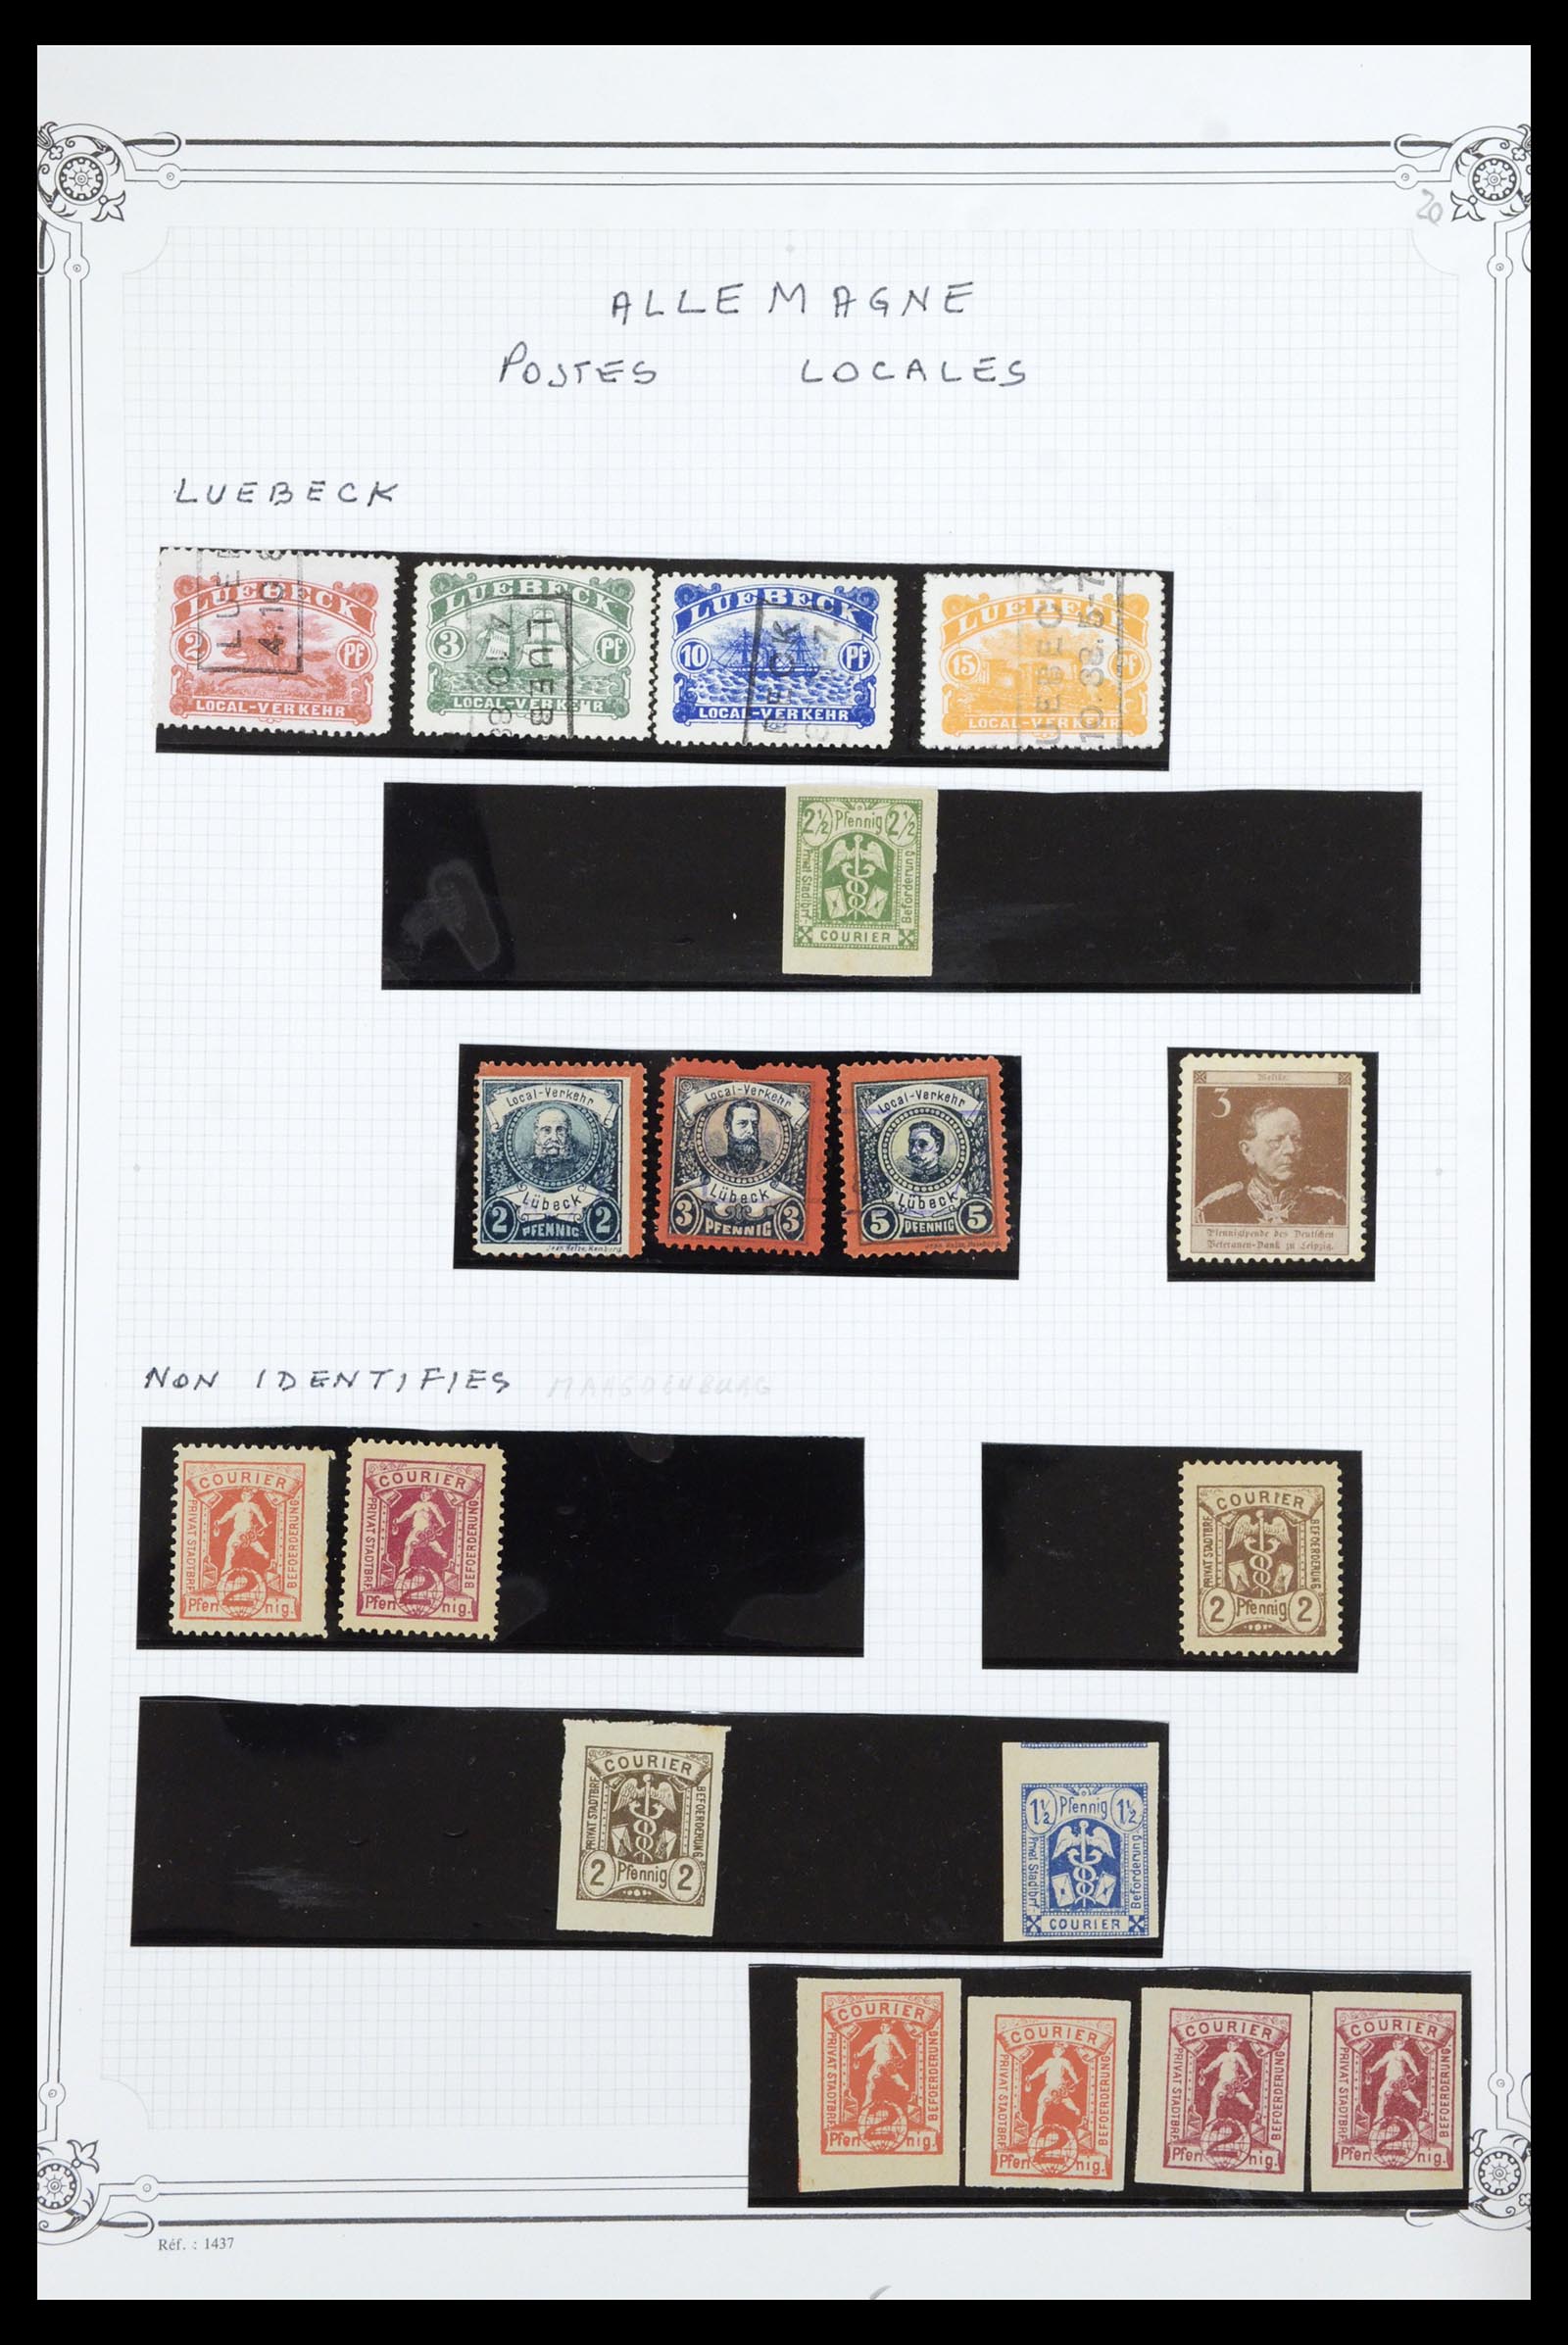 36972 019 - Stamp collection 36972 Germany local post 1880-1900.